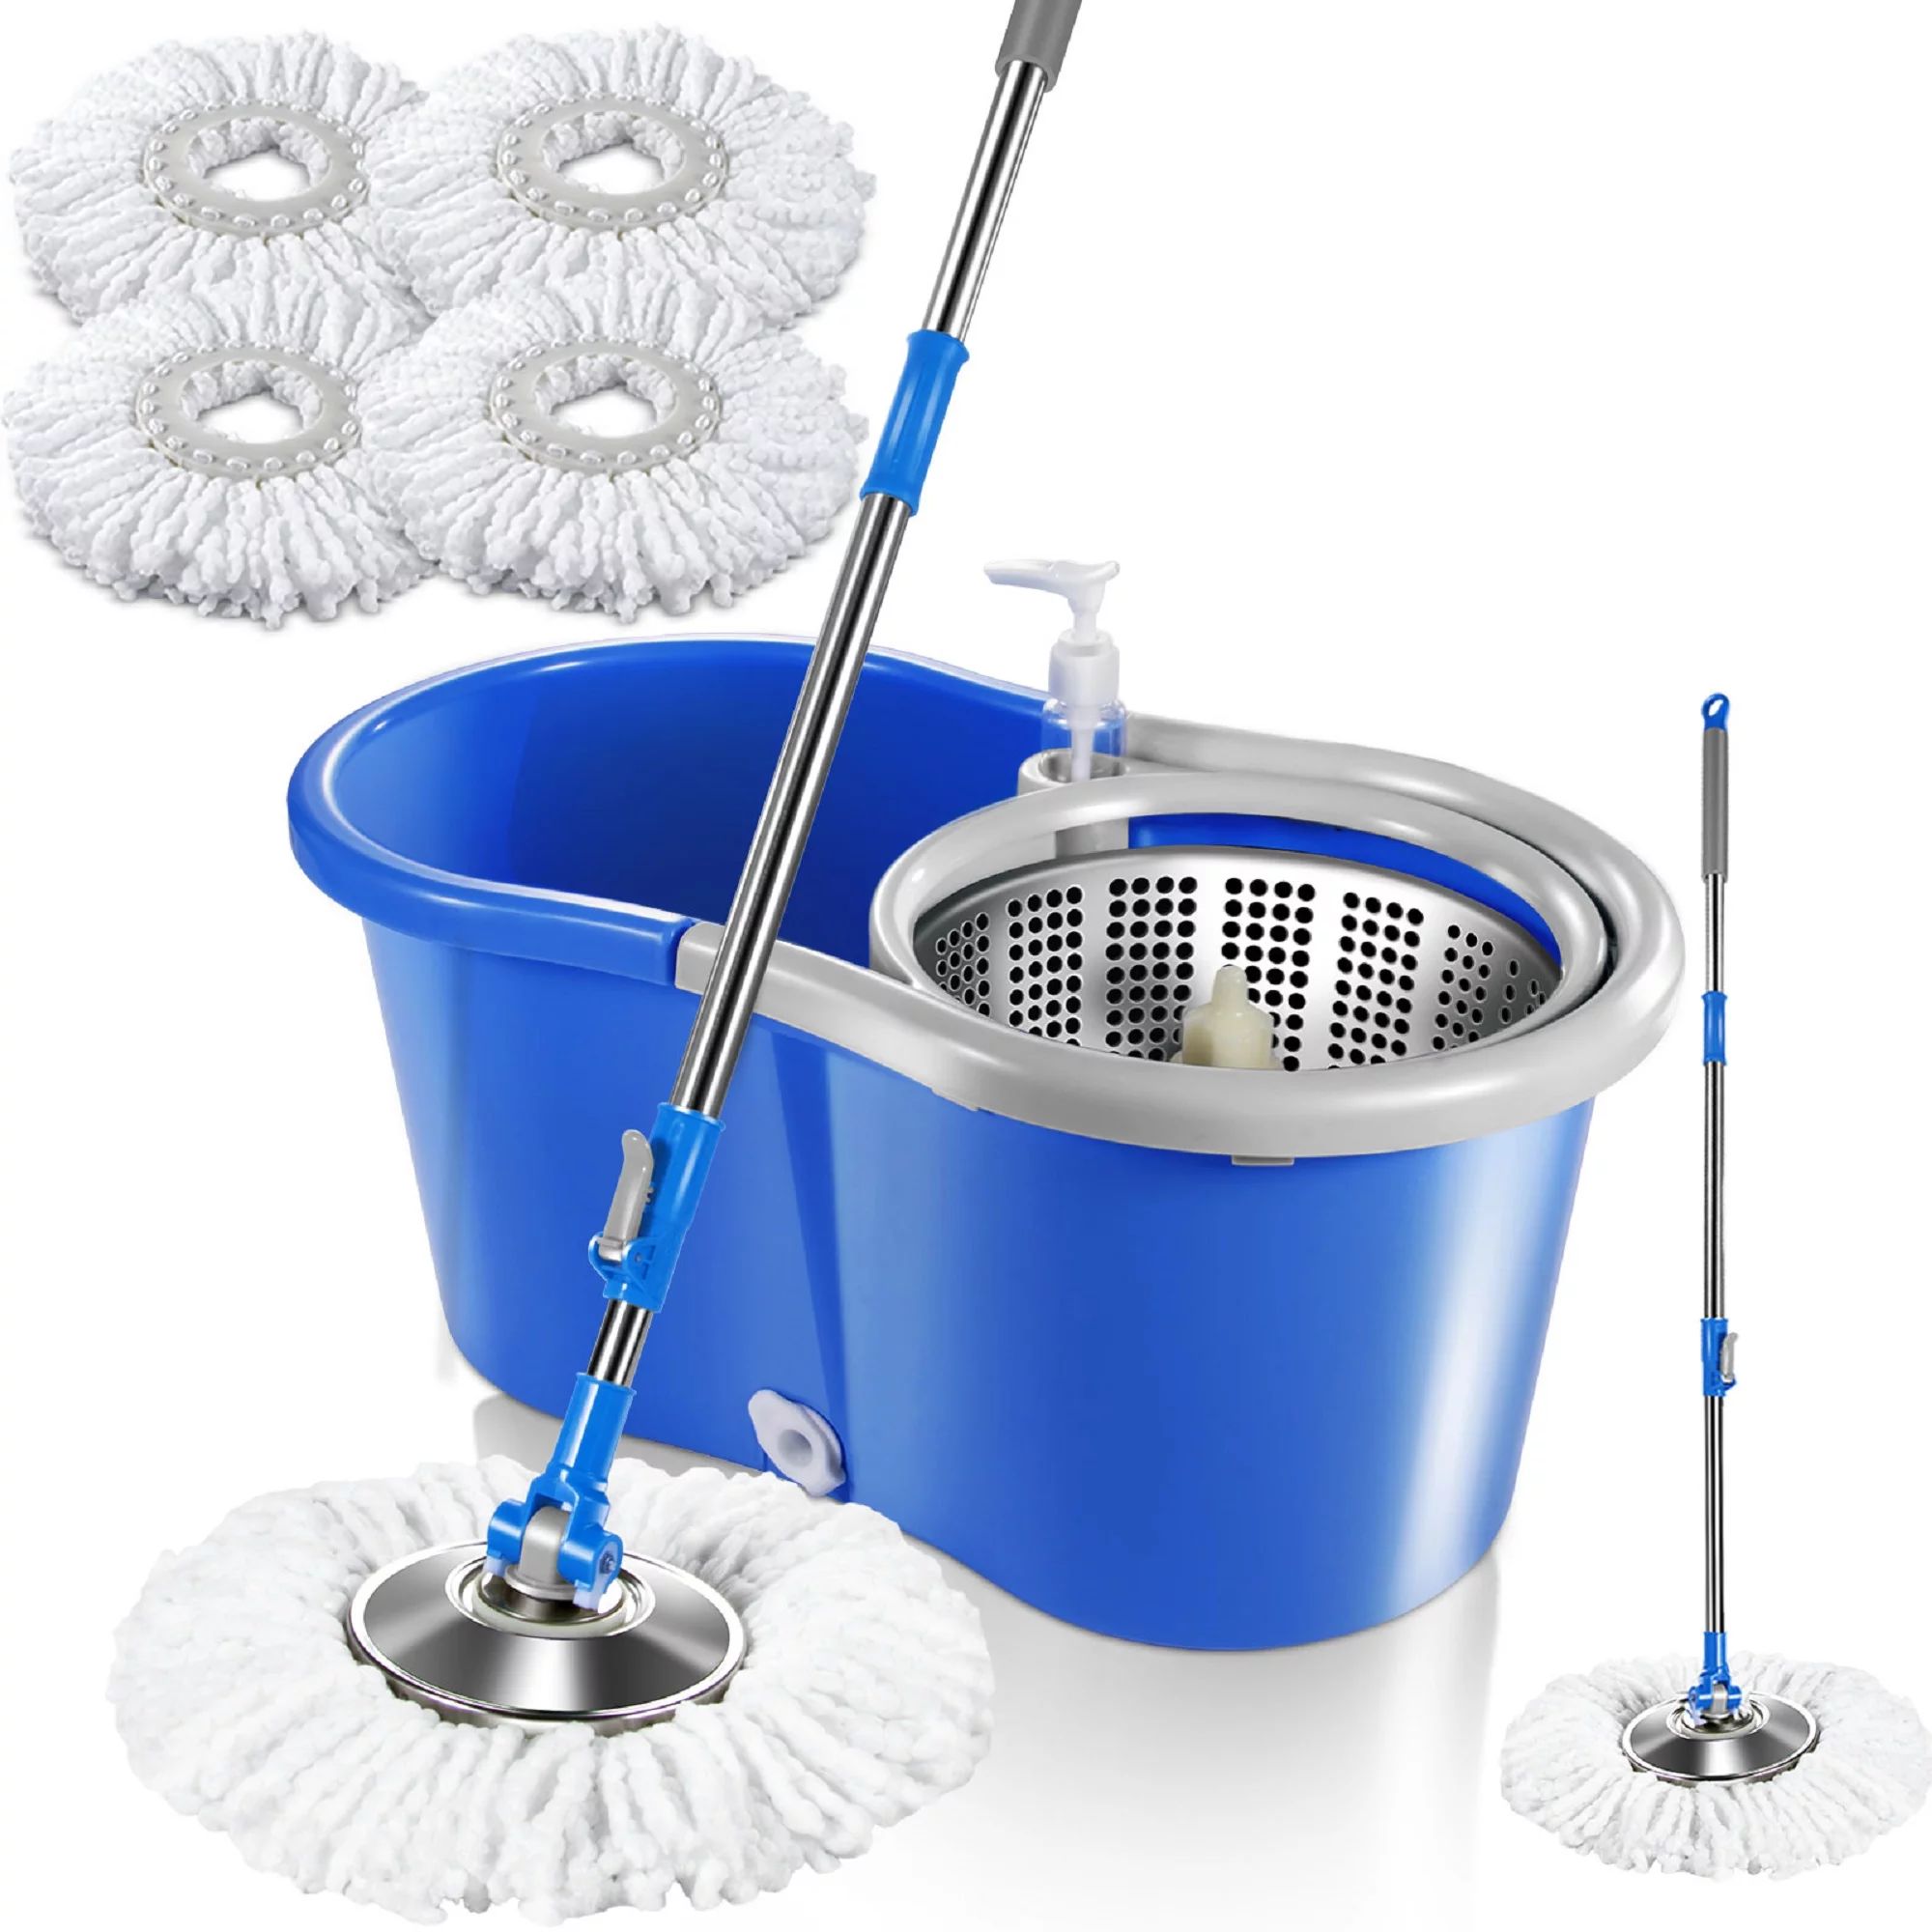 Mastertop Spin Mop and Bucket System with Wringer Set for Floor Cleaning, 4 Microfiber Mop Heads | Walmart (US)